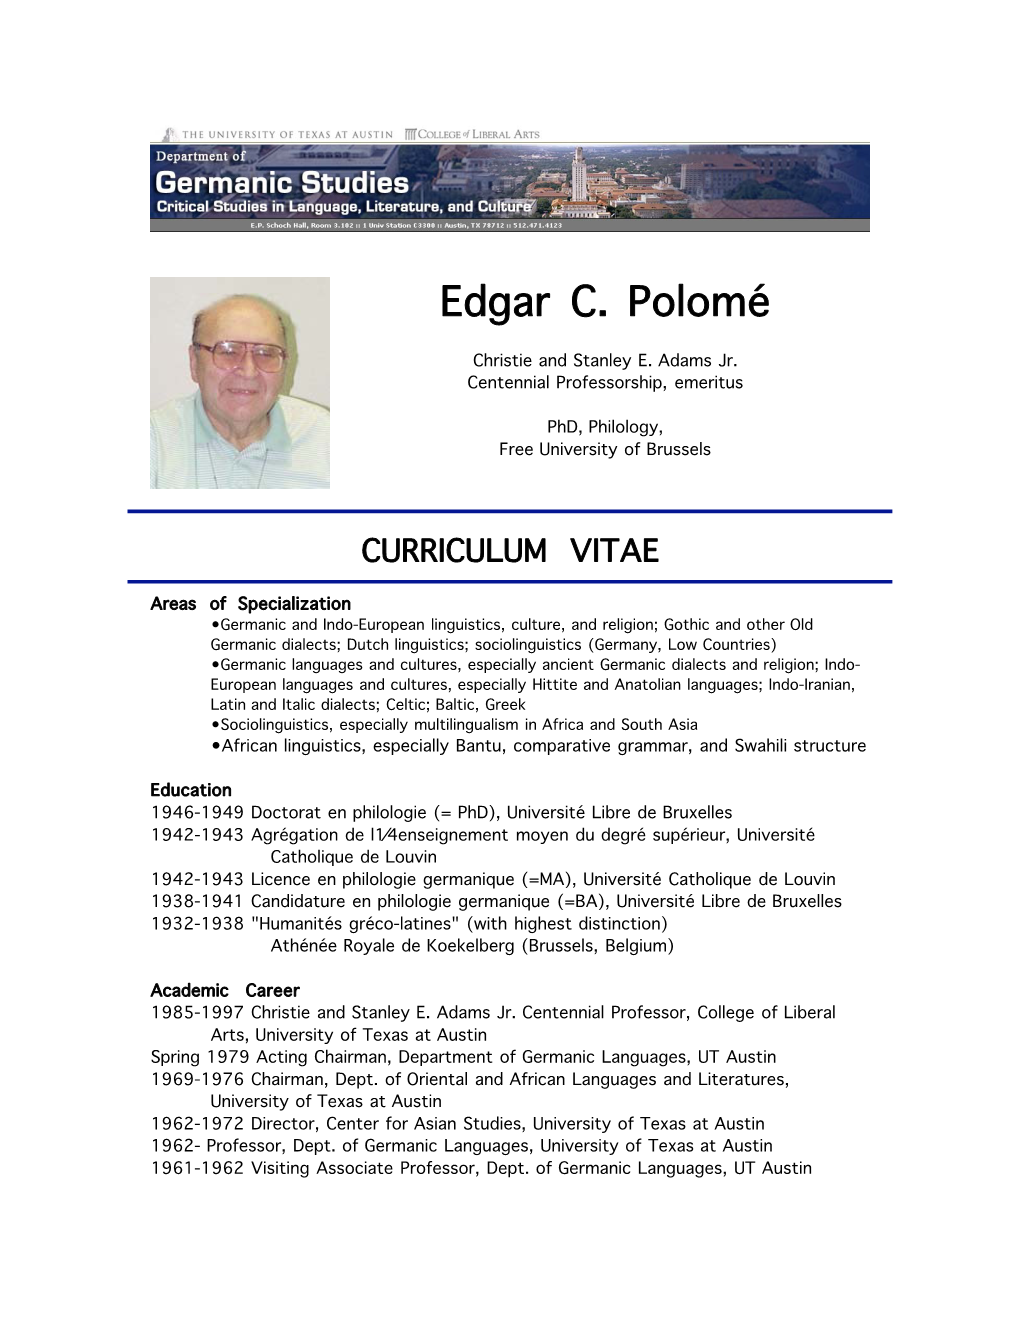 Edgar Polomé Cared Enough to Share So Much of His Knowledge and Experience with Us, Almost Until the Last Day of His Life